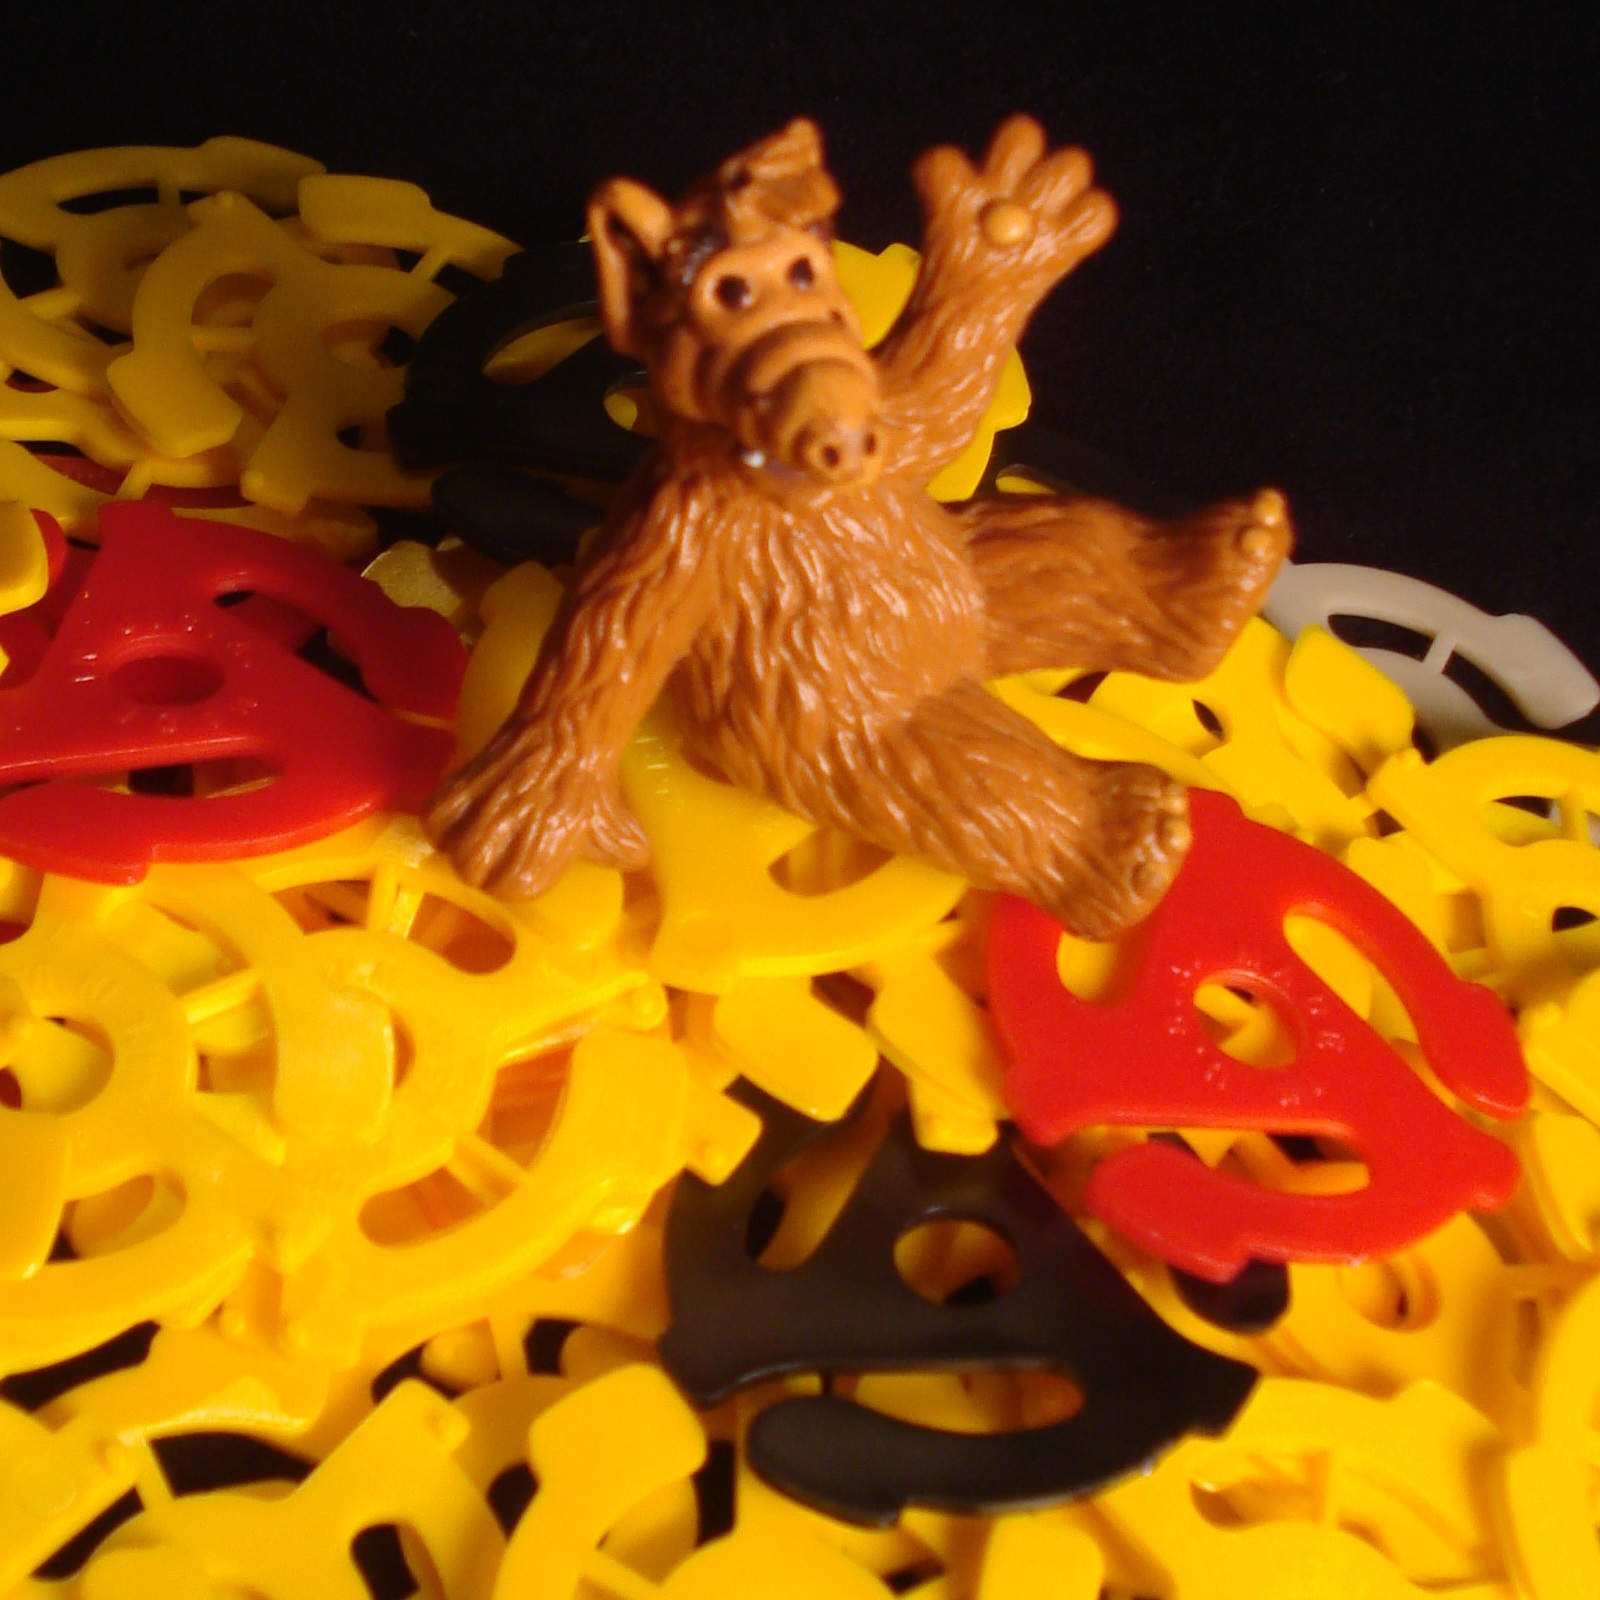 Small Alf doll sitting on pile of plastic toy pieces waves to the camera